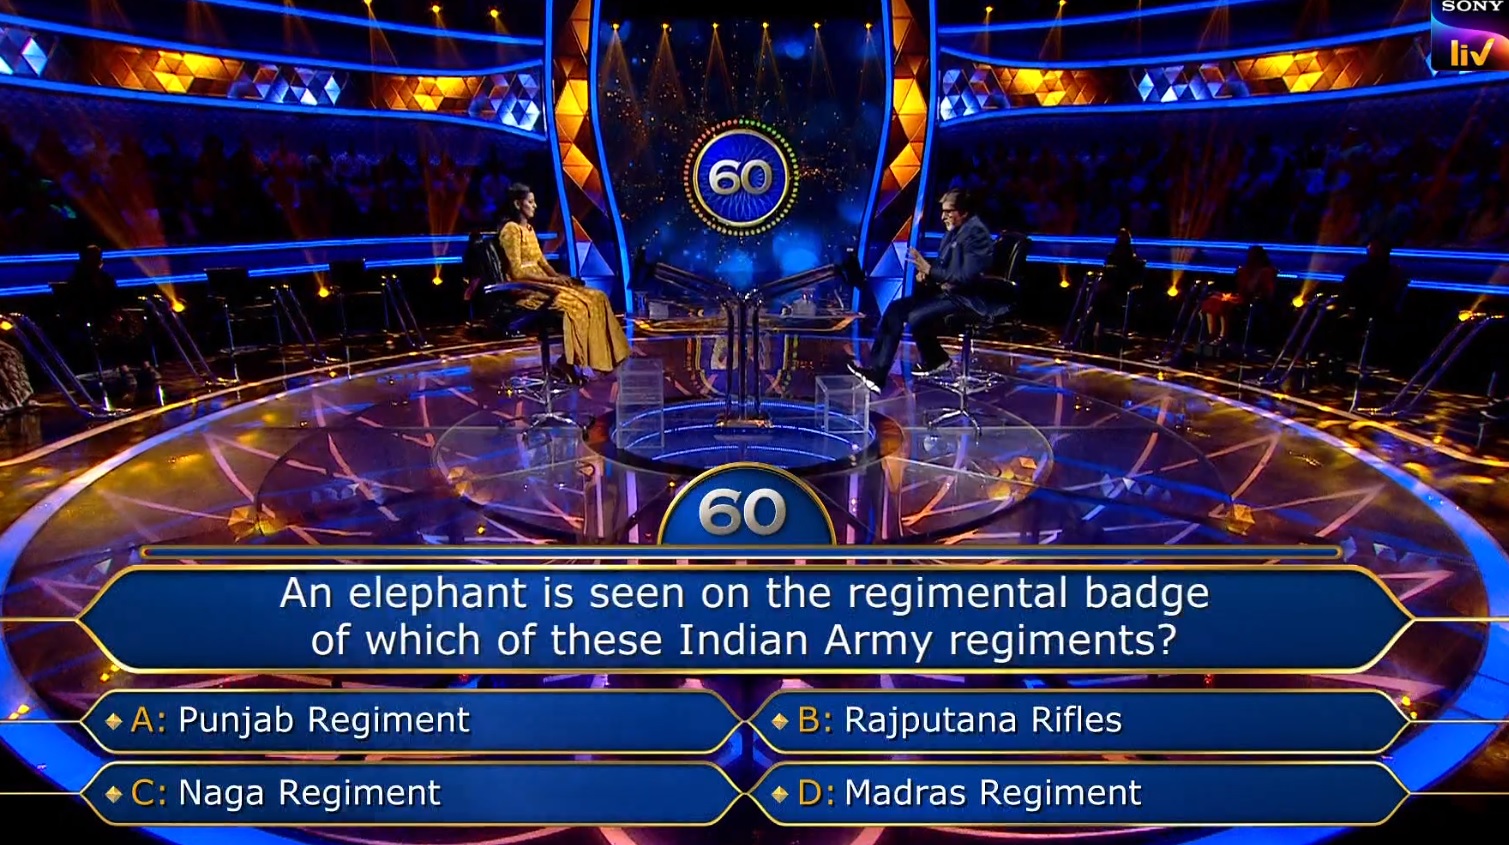 Ques : An elephant is seen on the regimental badge of which of these Indian Army regiments?